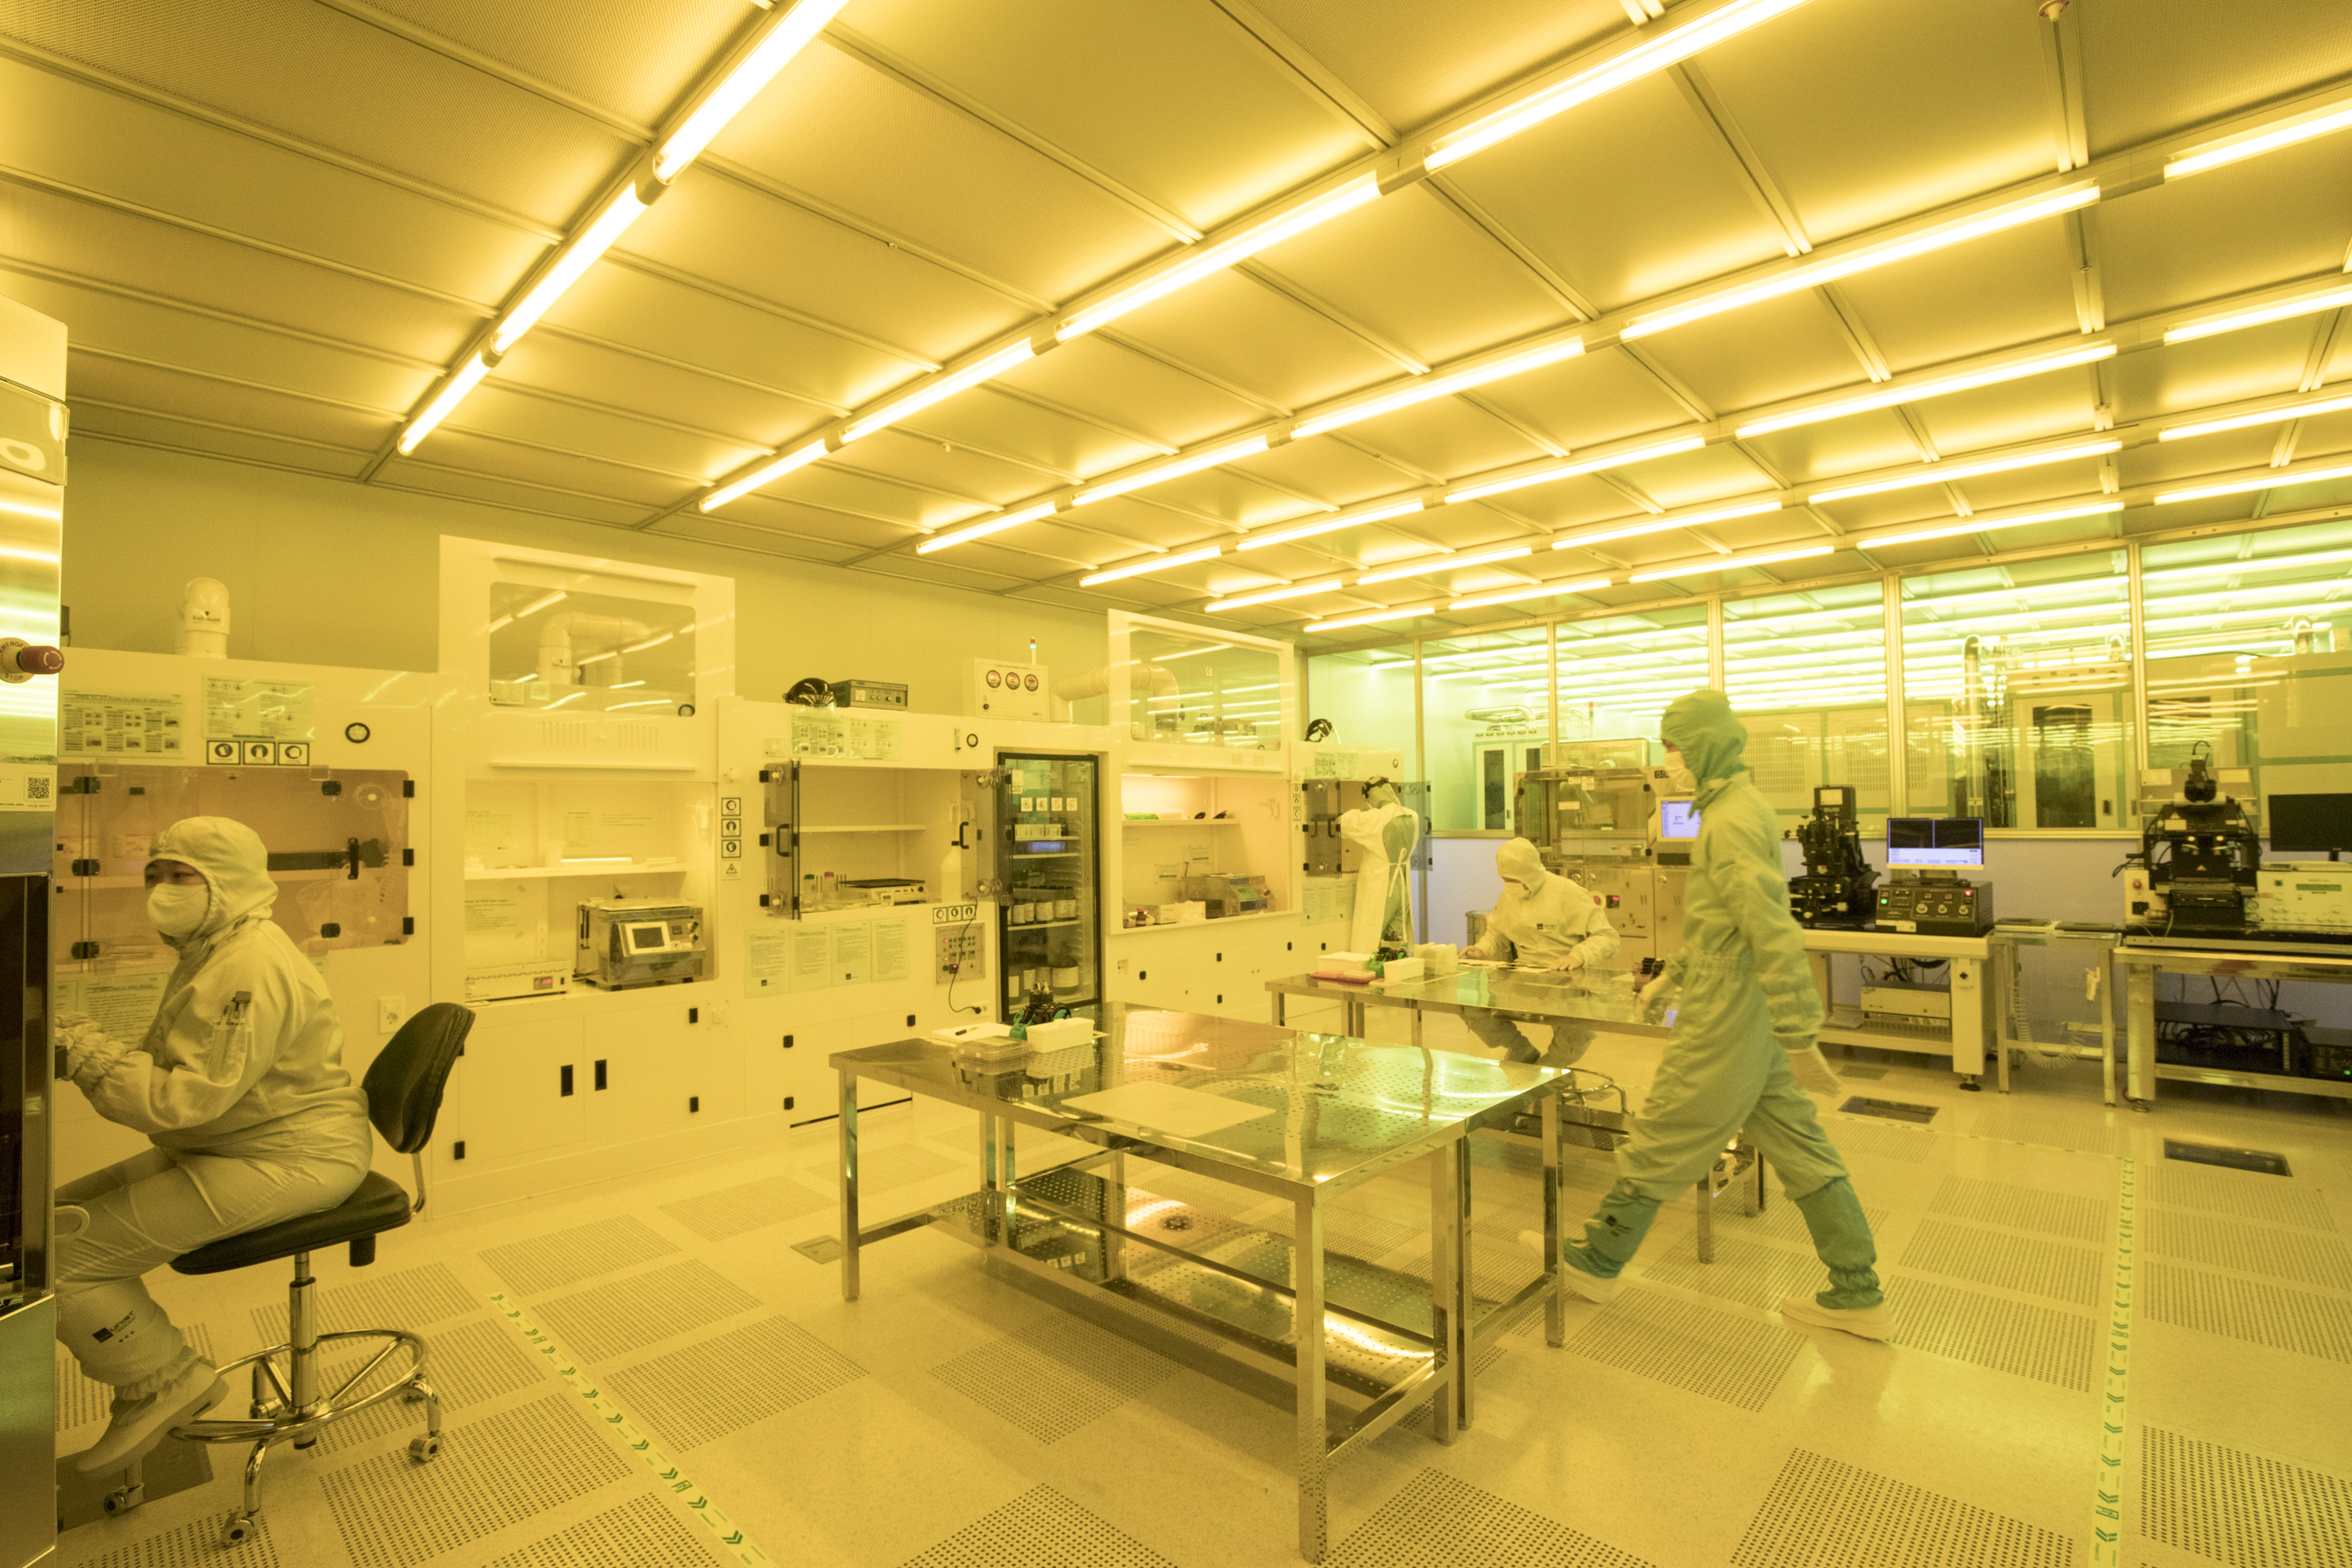 Shown above is the UNIST Nano Fabrication Cleanroom (UNFC) at UNIST Central Research Facility (UCRF).